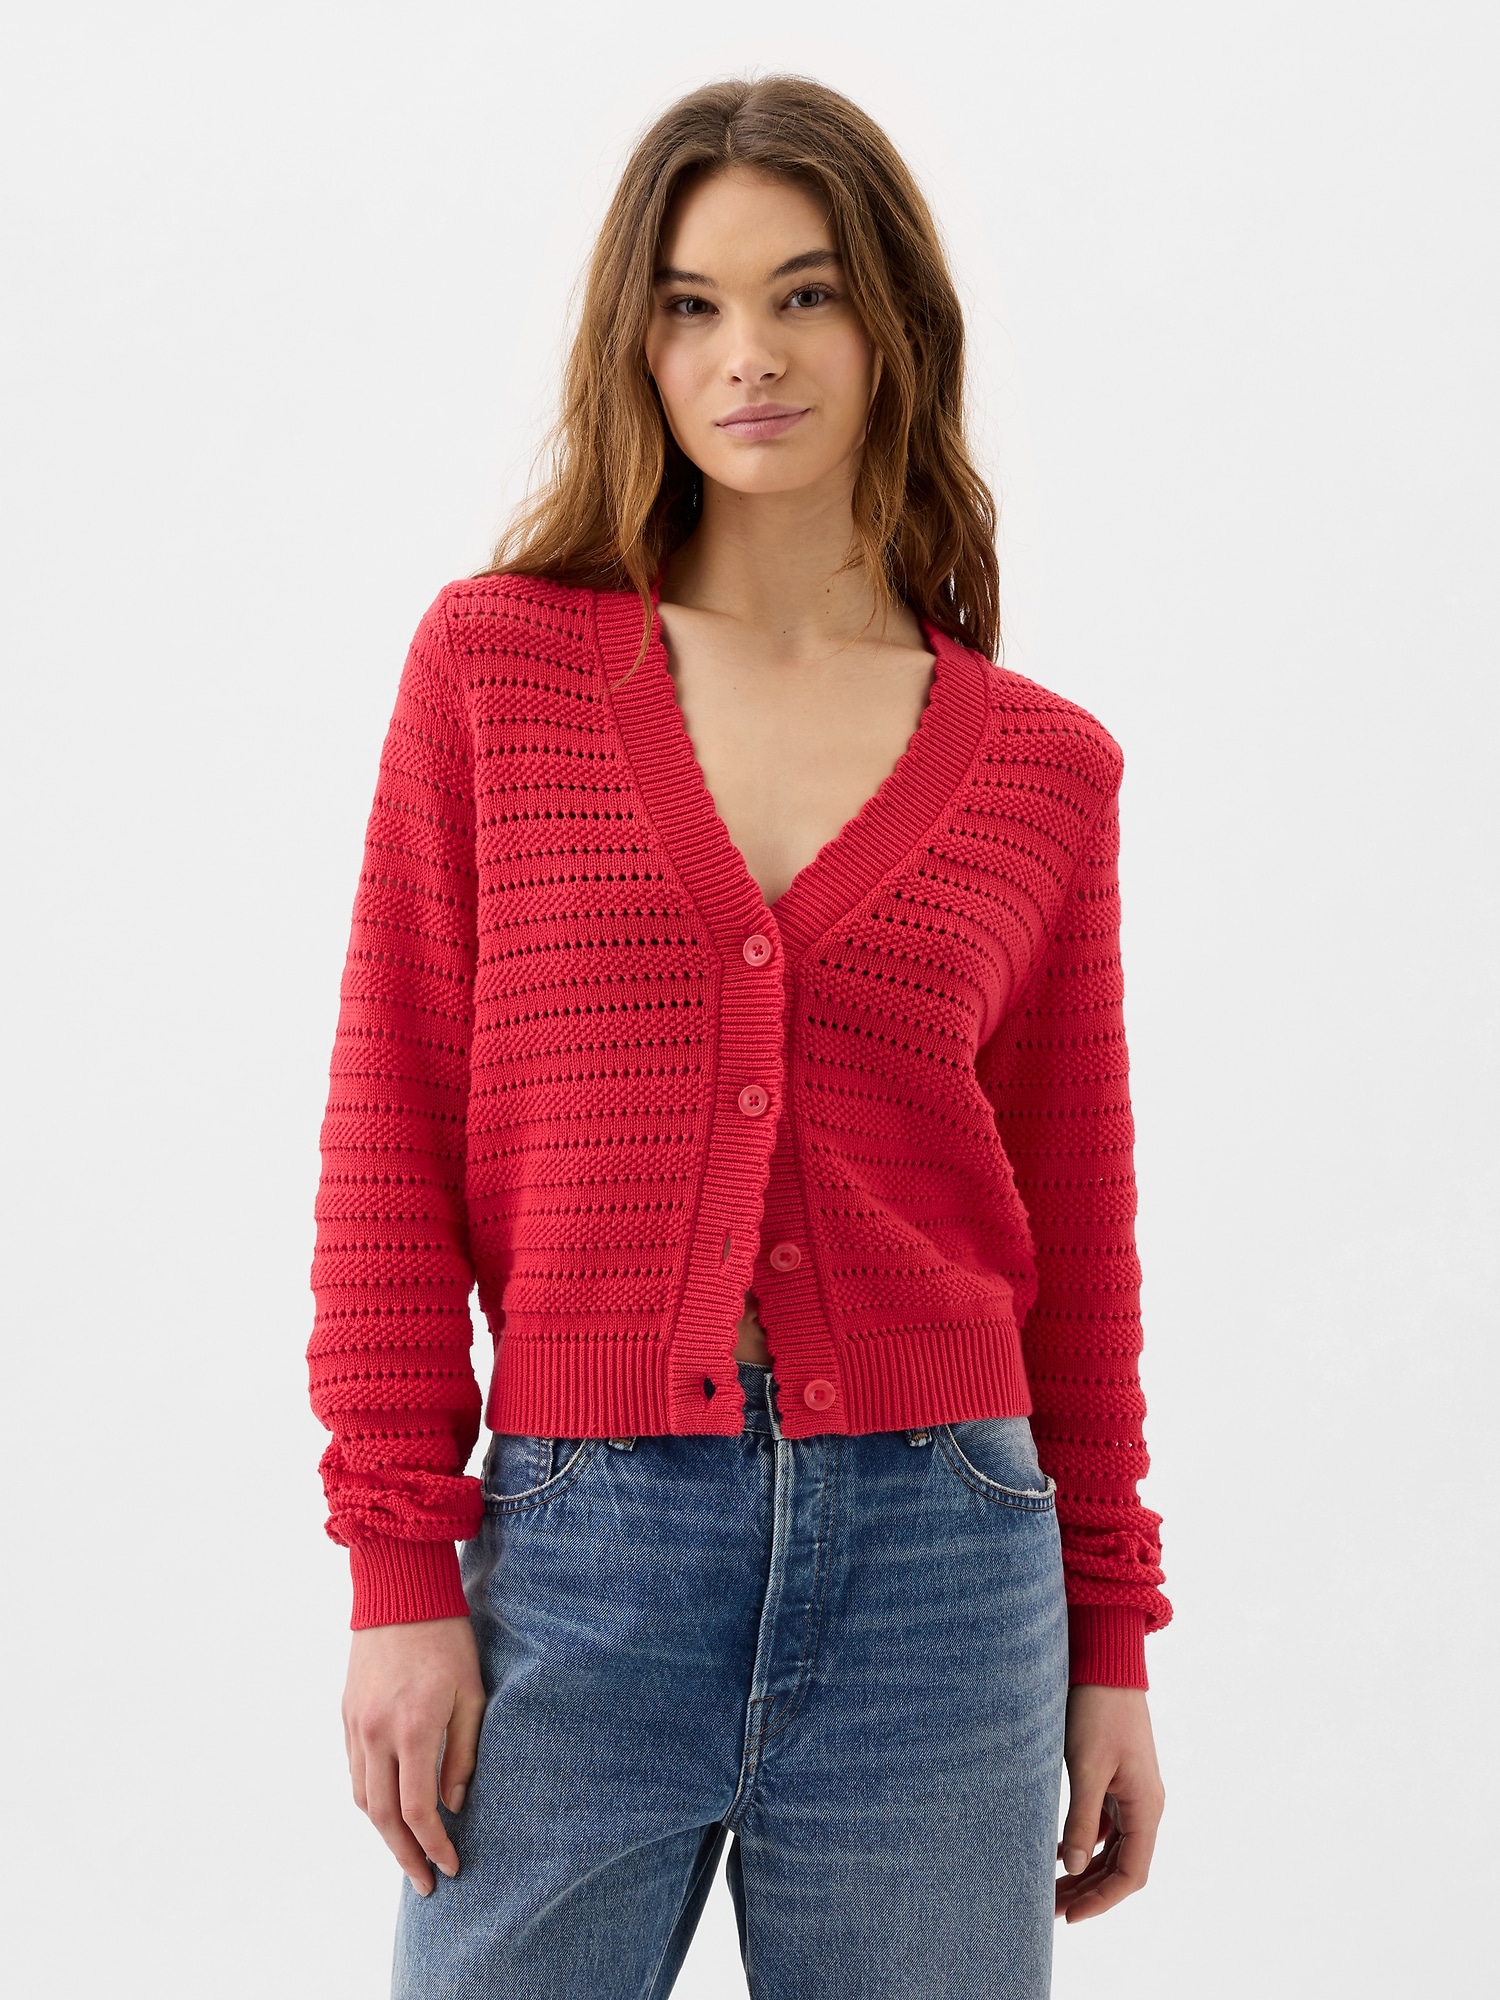 Relaxed Mixed-Stitch Cardigan | Gap Factory